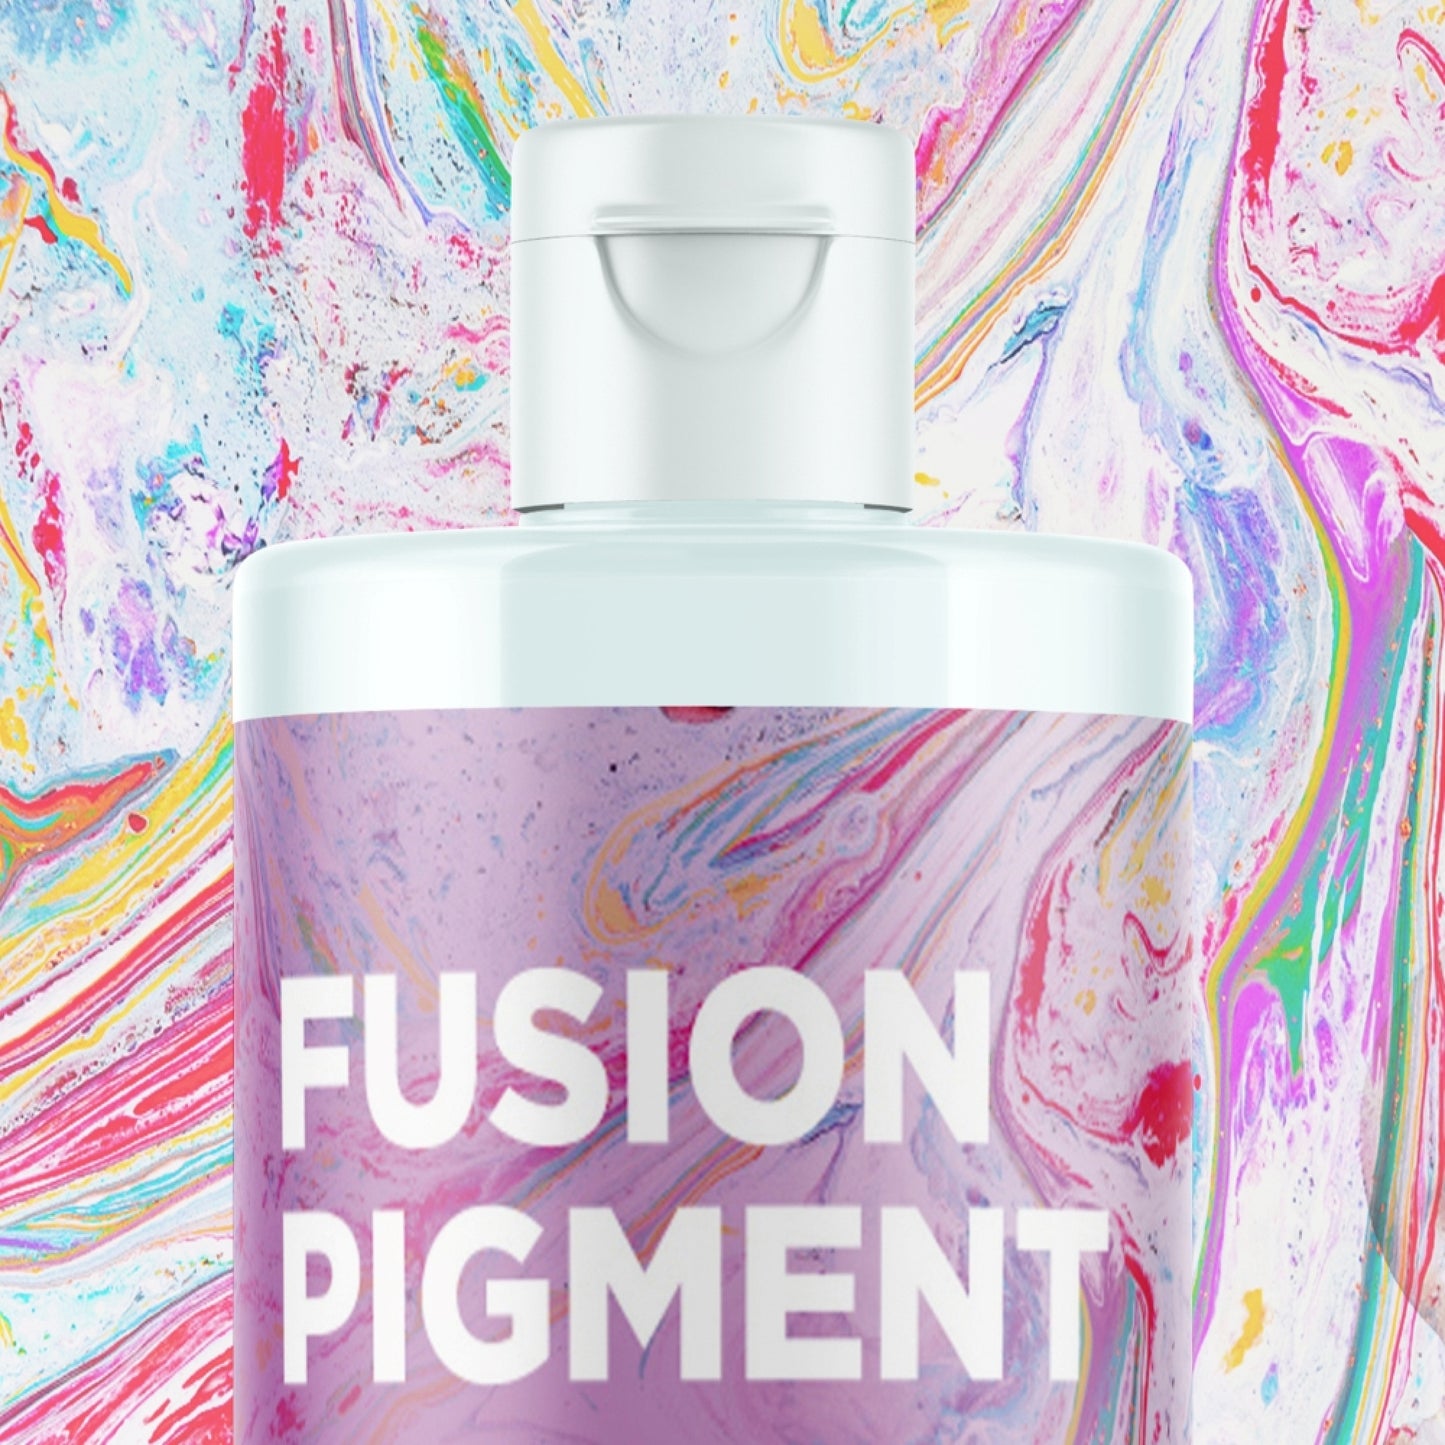 Timeless Beauty: Infuse brightness and clarity with Fusion White